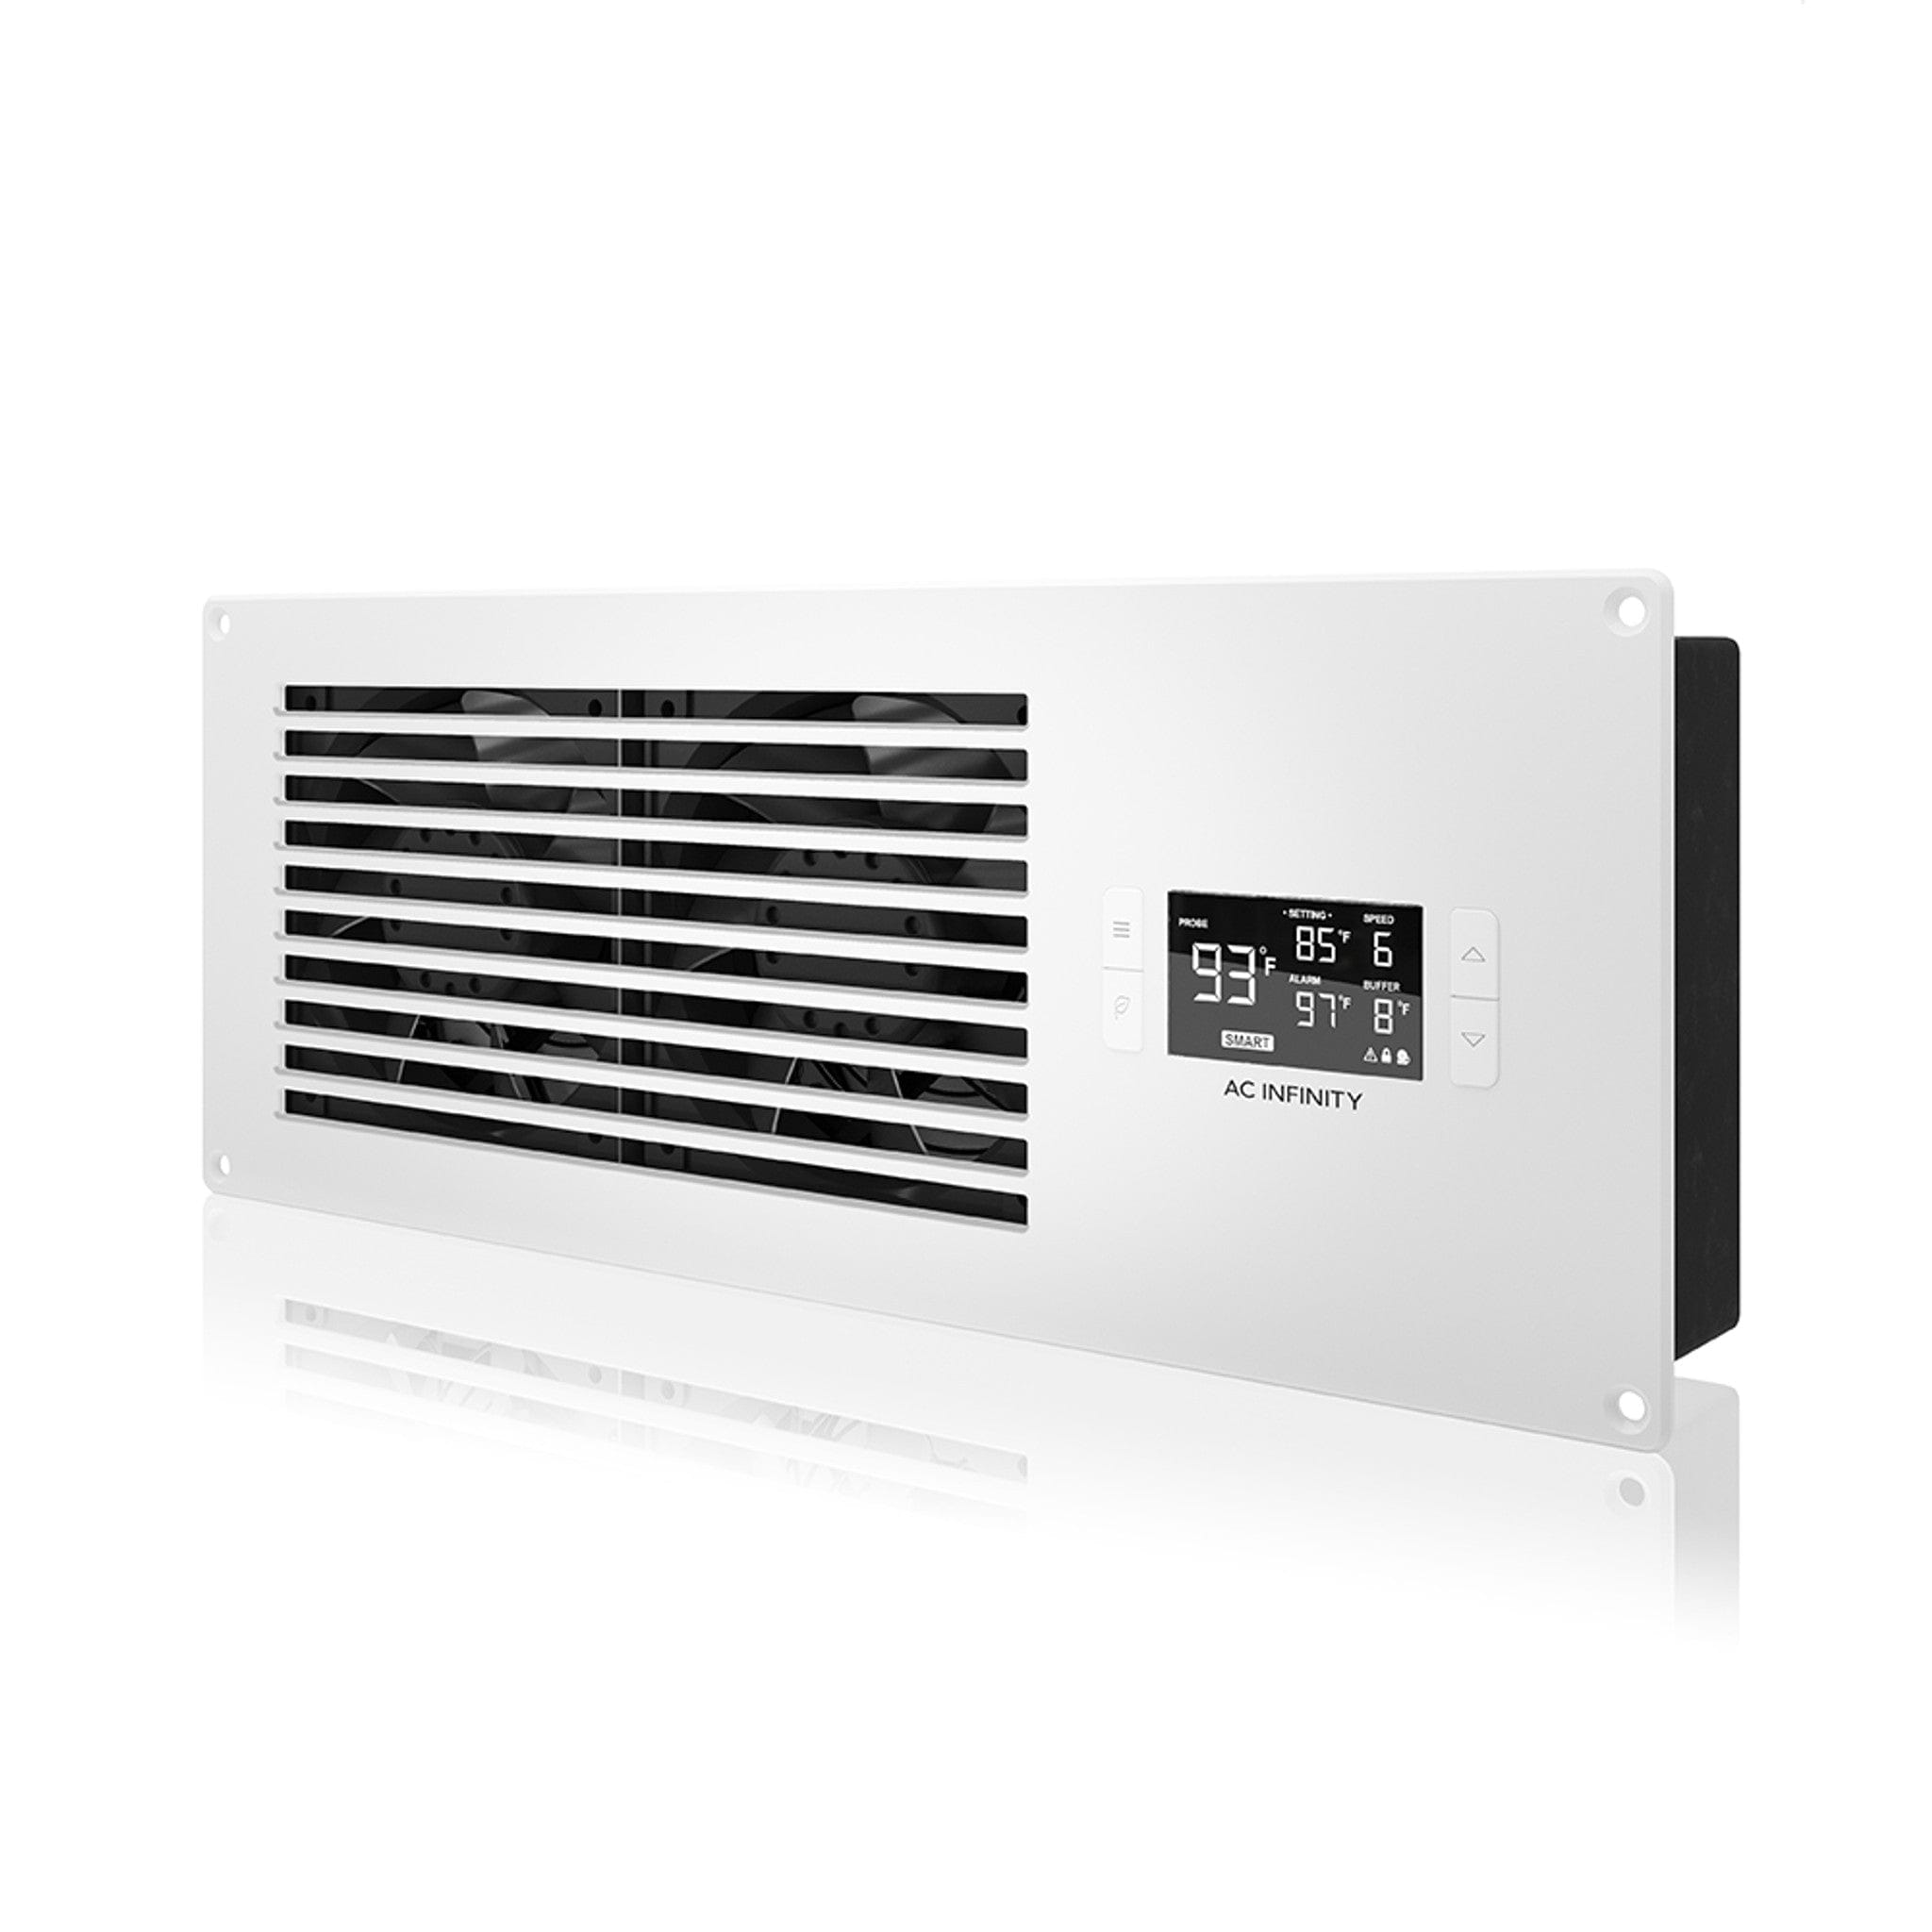 AC Infinity Airplate T8 Home Theater and AV Quiet Cabinet Cooling